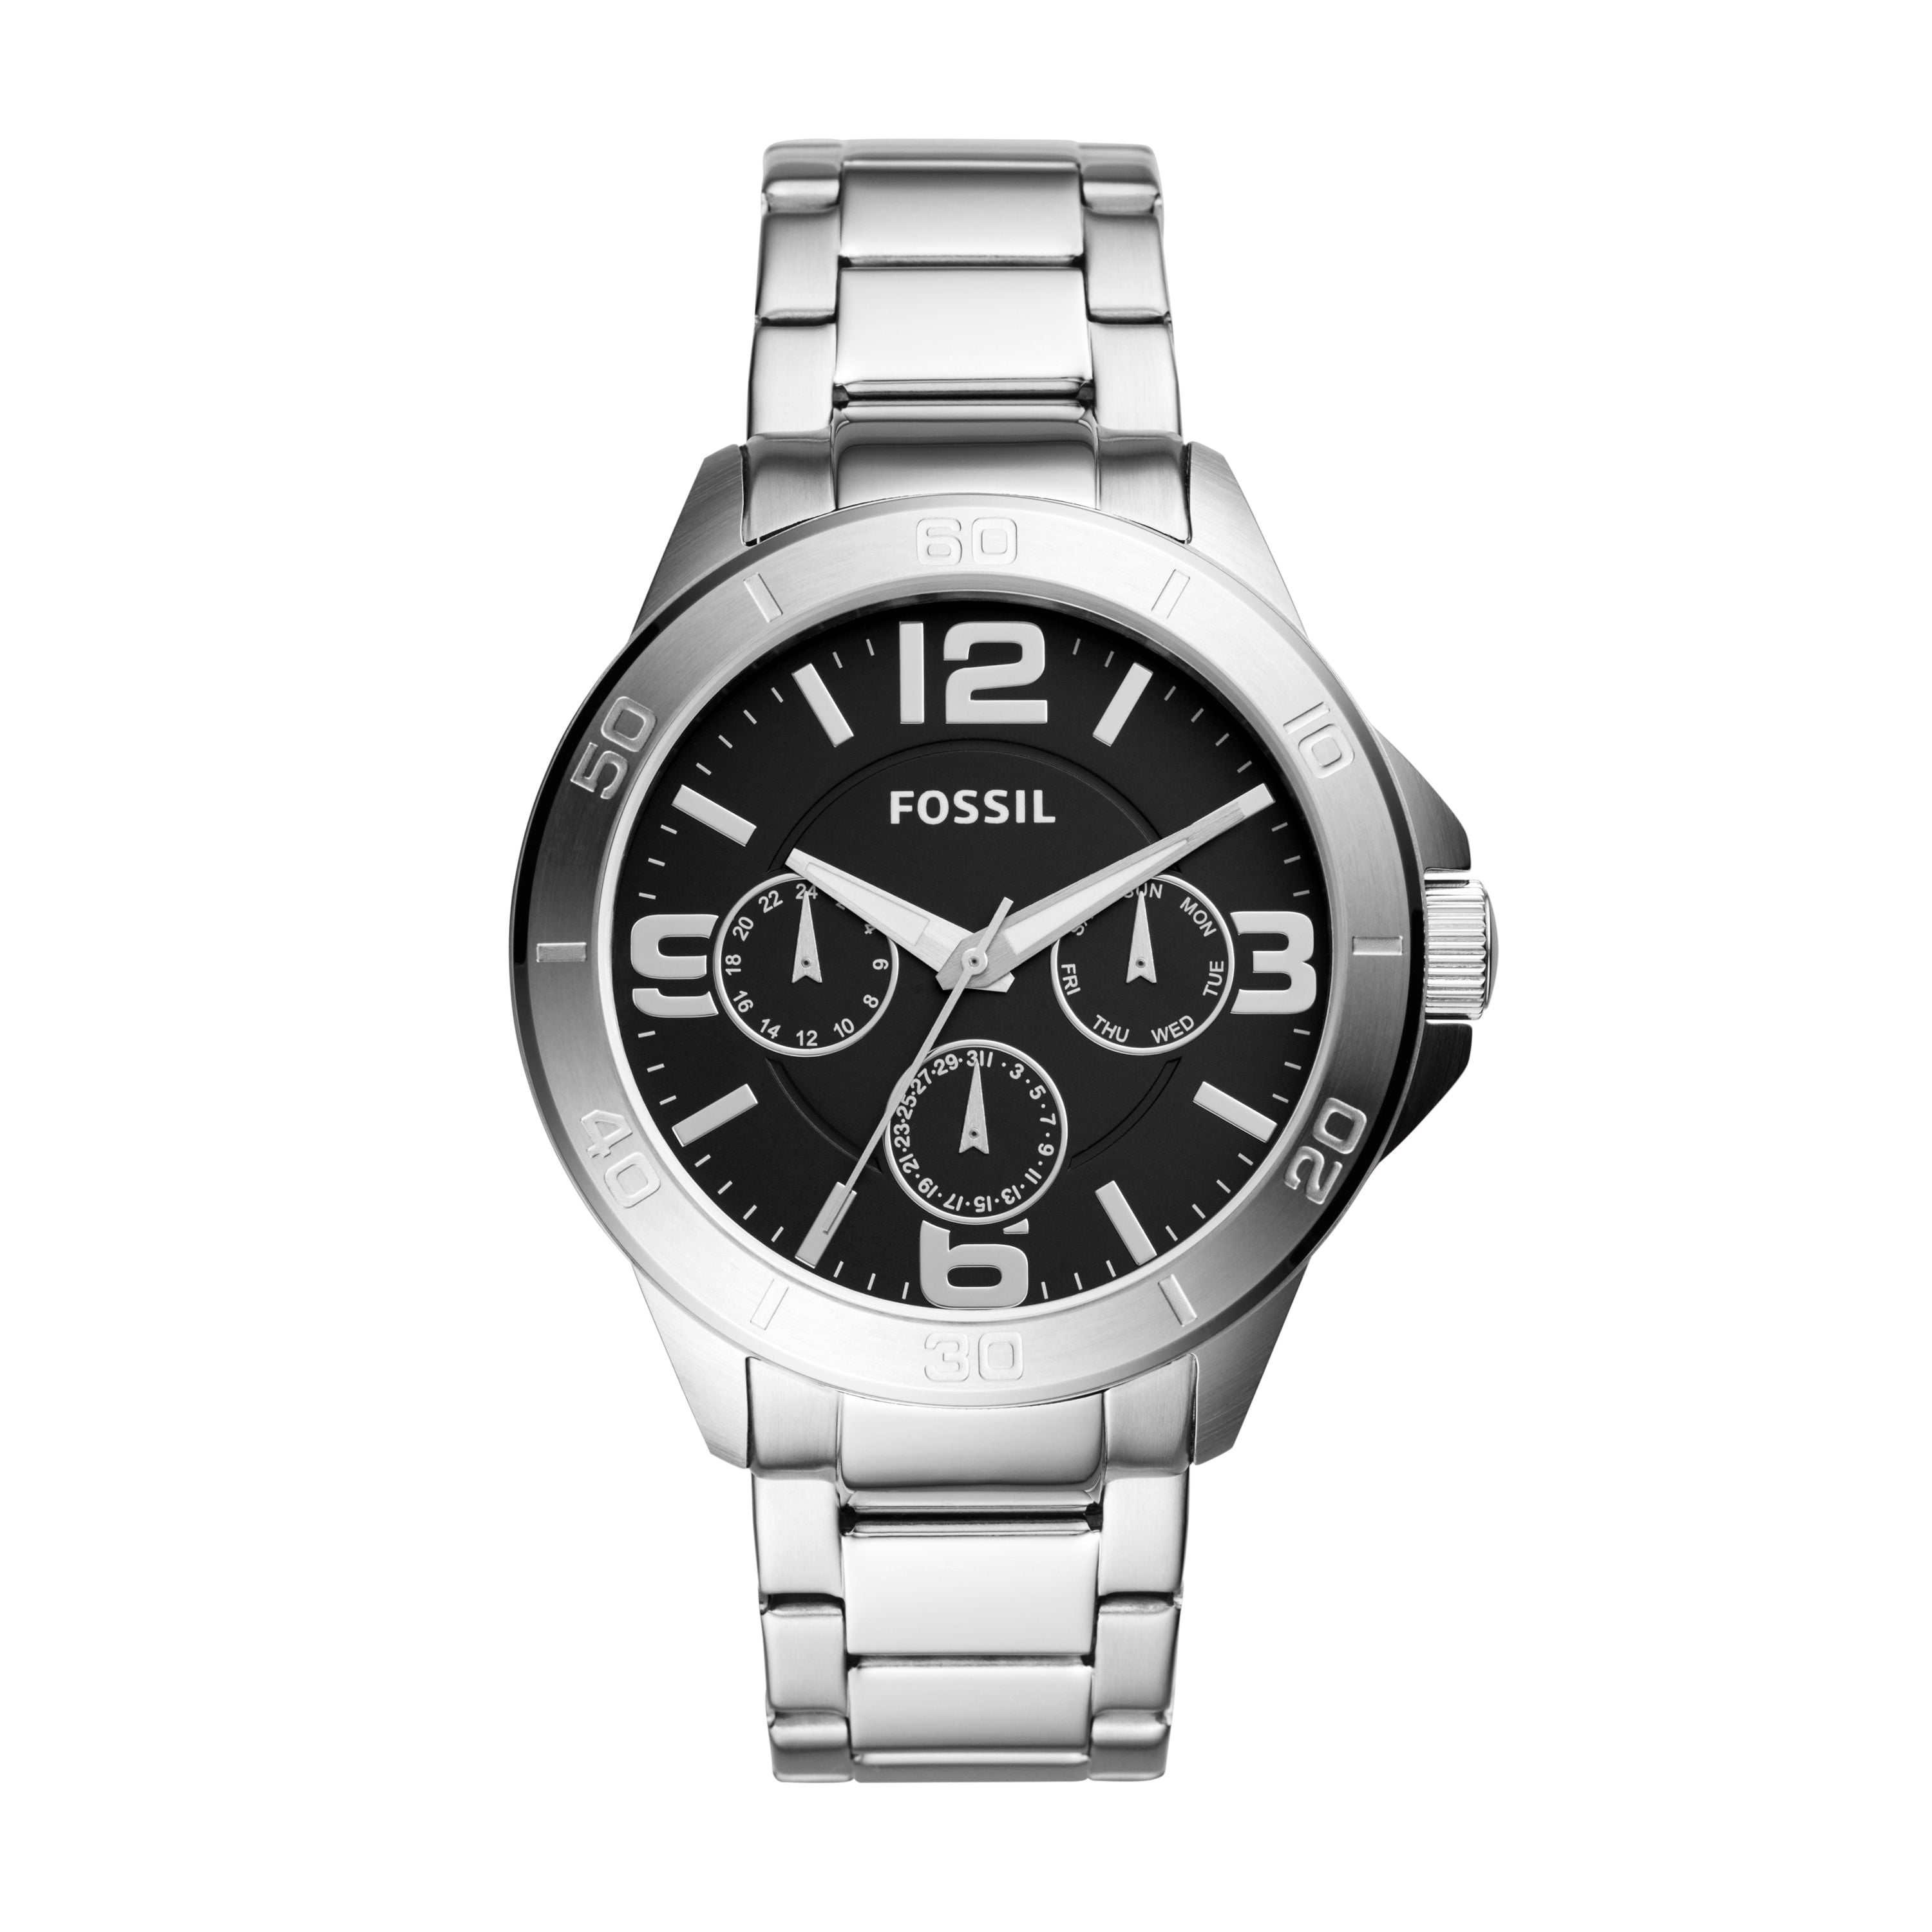 Fossil Men's Privateer Sport Silver Tone Stainless Steel Watch (Style ...